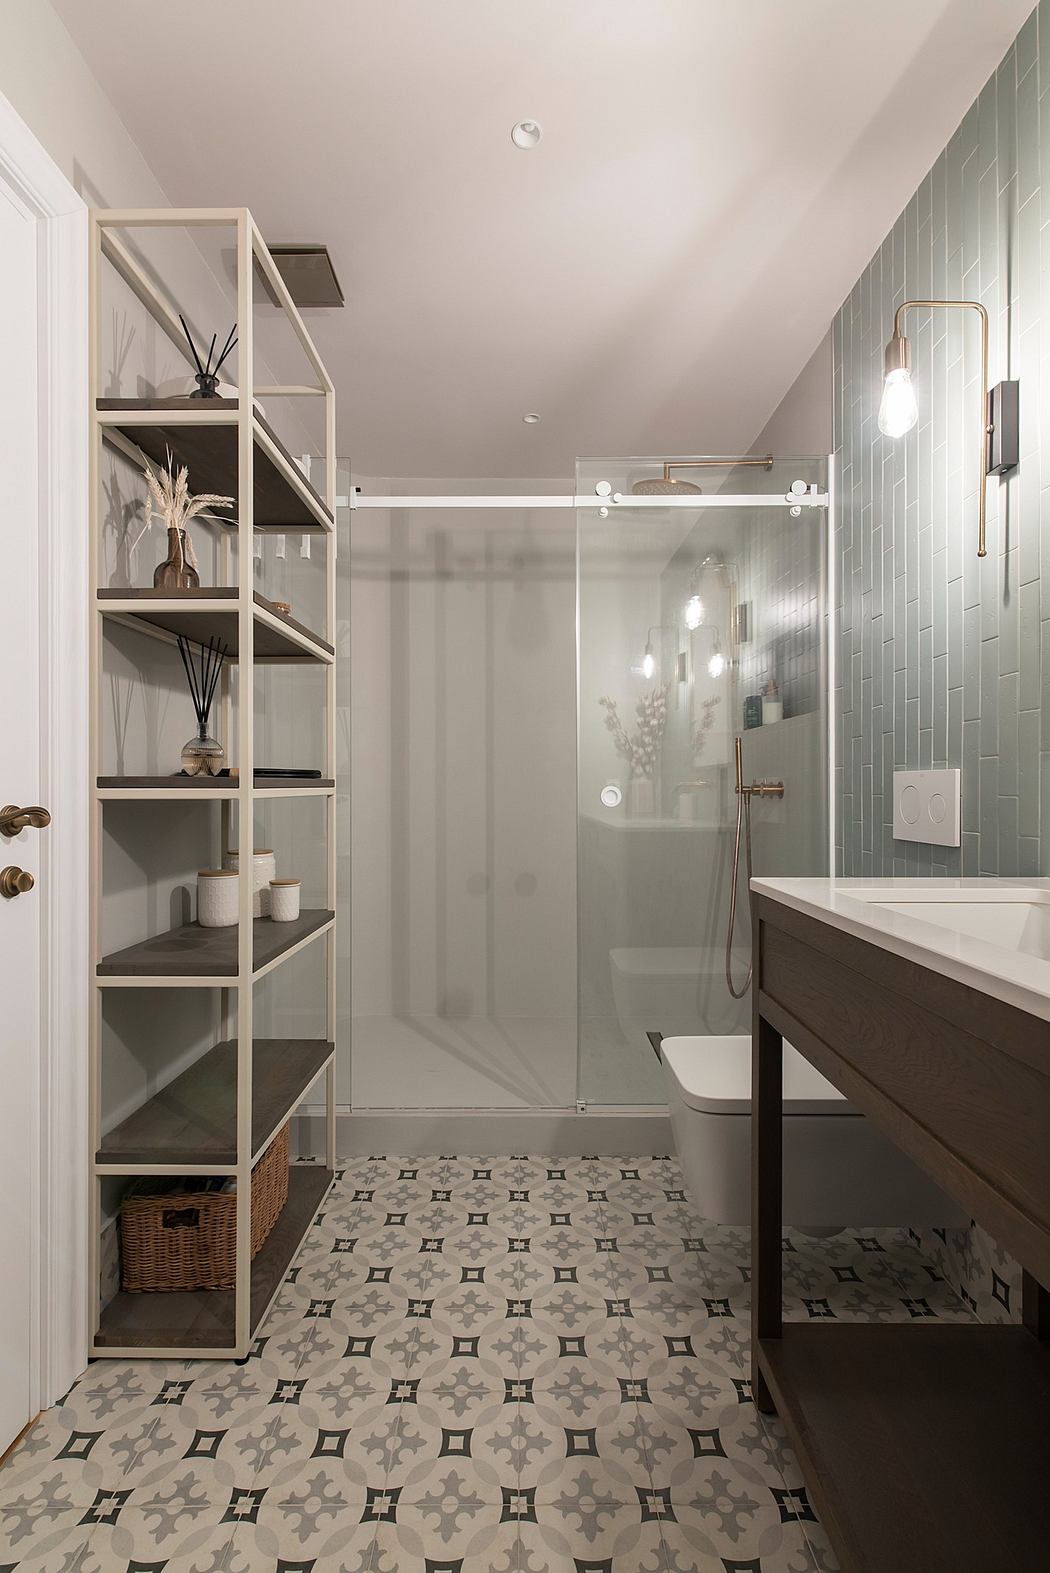 Modern bathroom with patterned floor tiles, glass shower, and shelving unit.